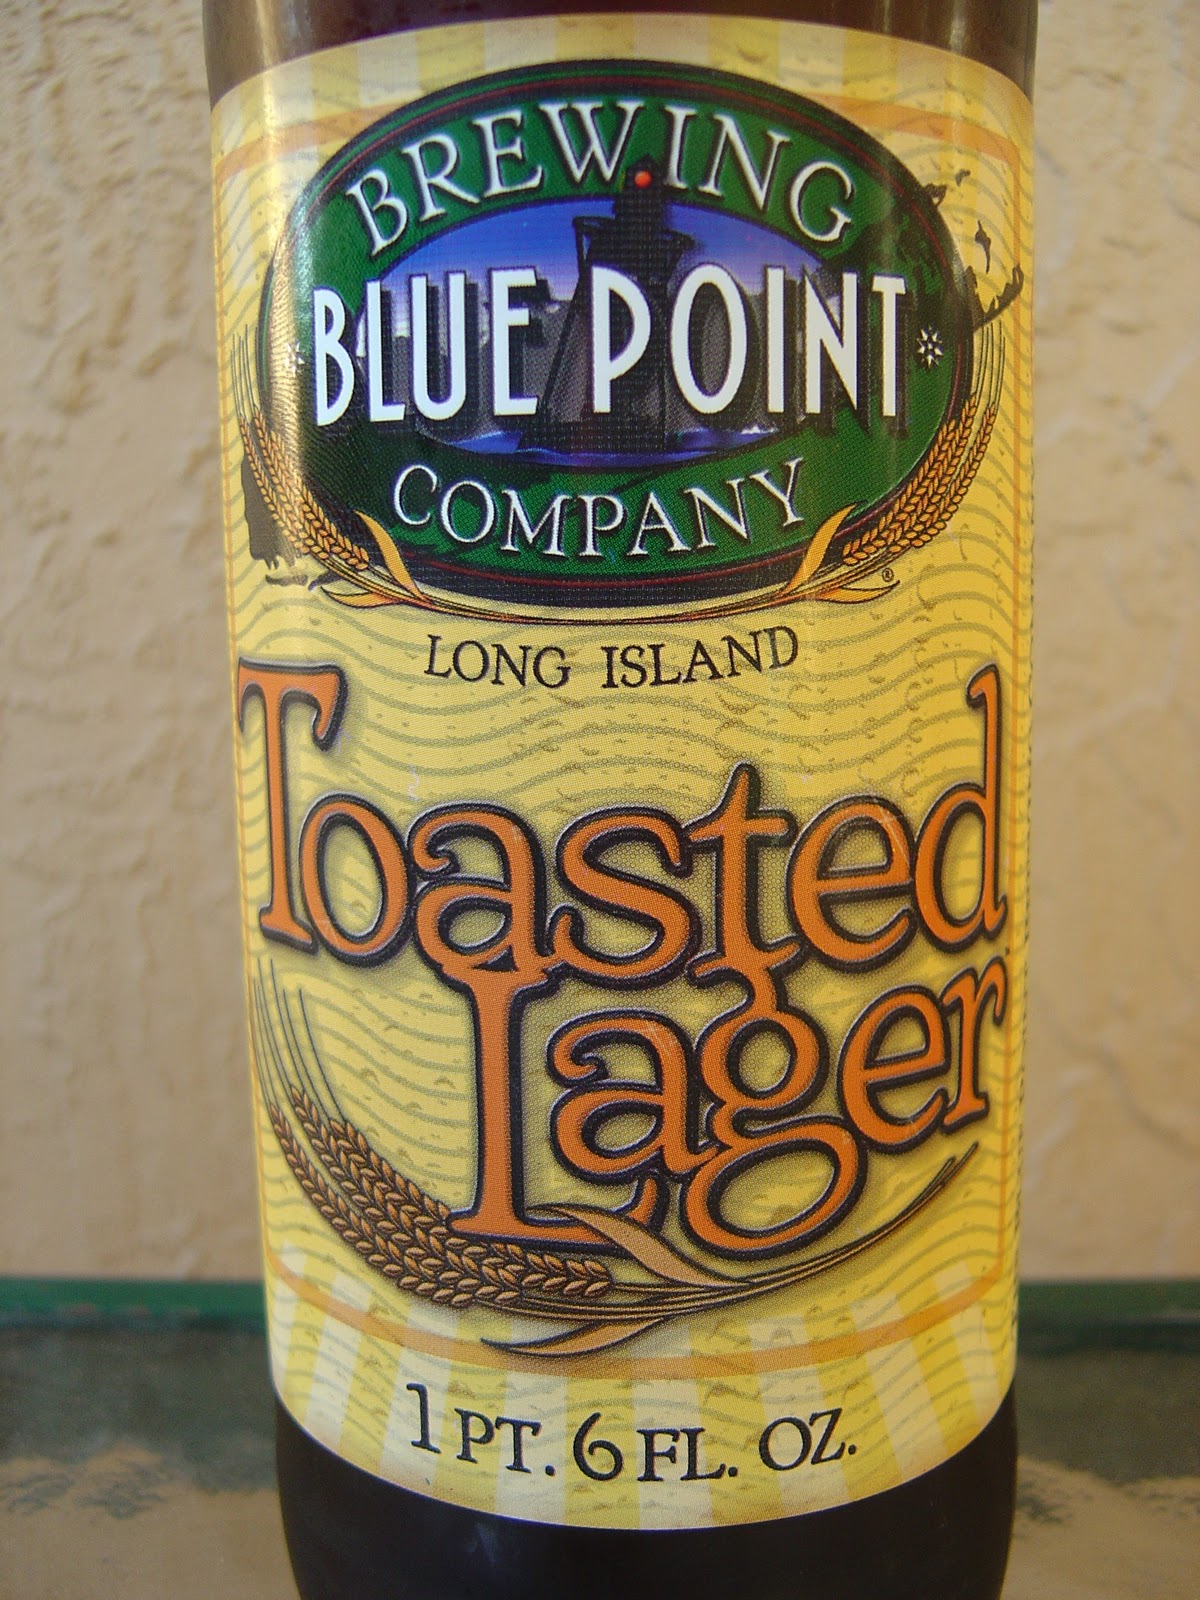 daily-beer-review-blue-point-toasted-lager